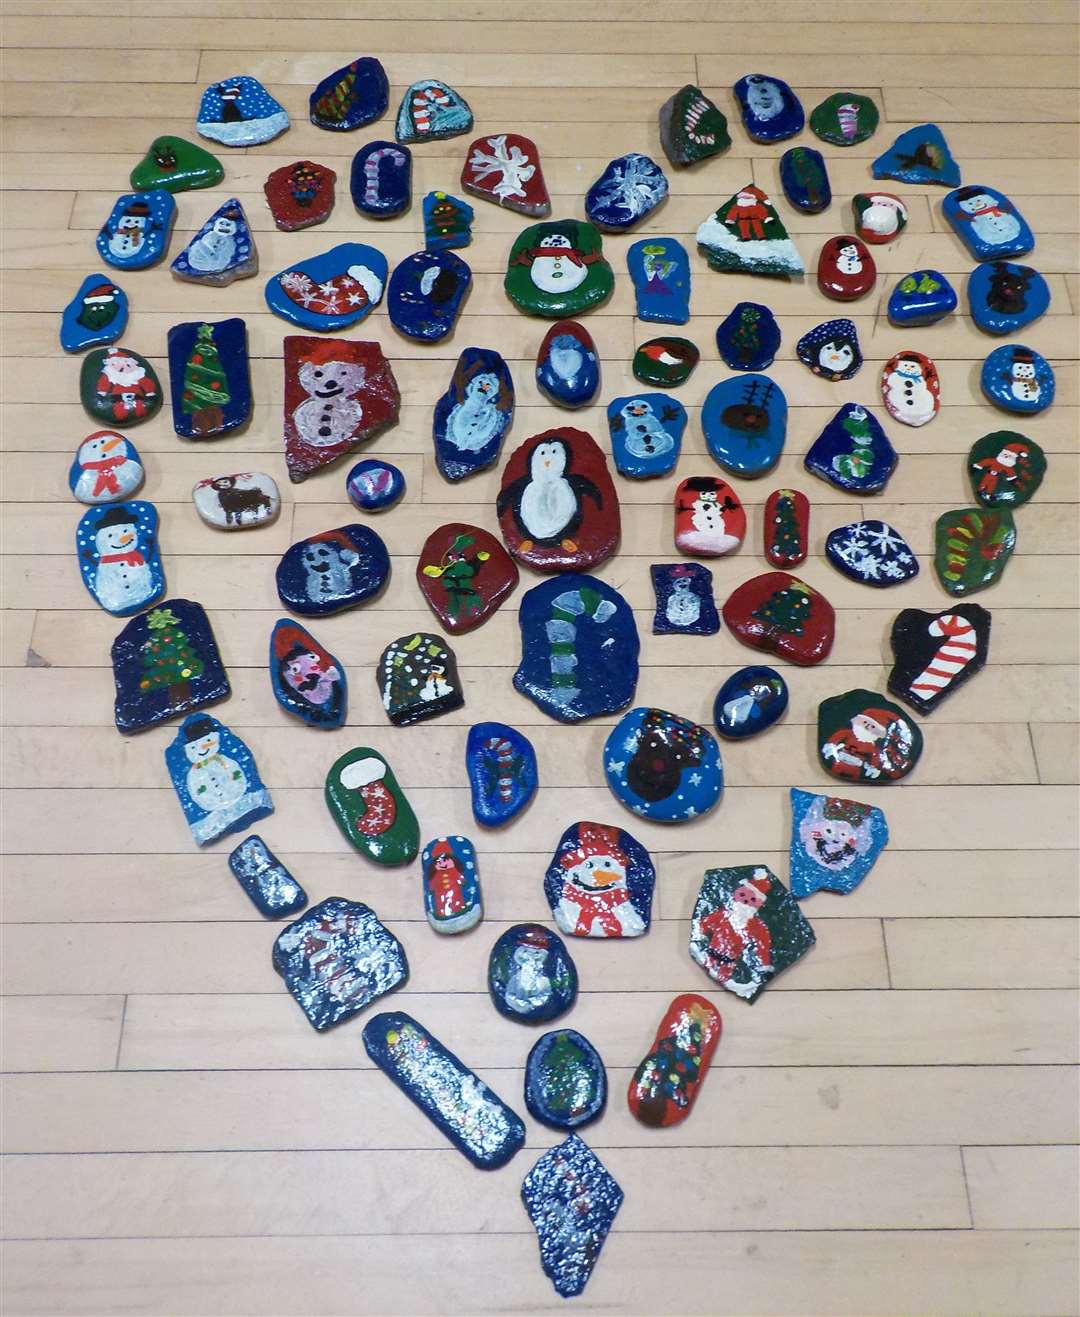 Pupils painted Christmas stones that were put out on display around Castletown and Dunnet.